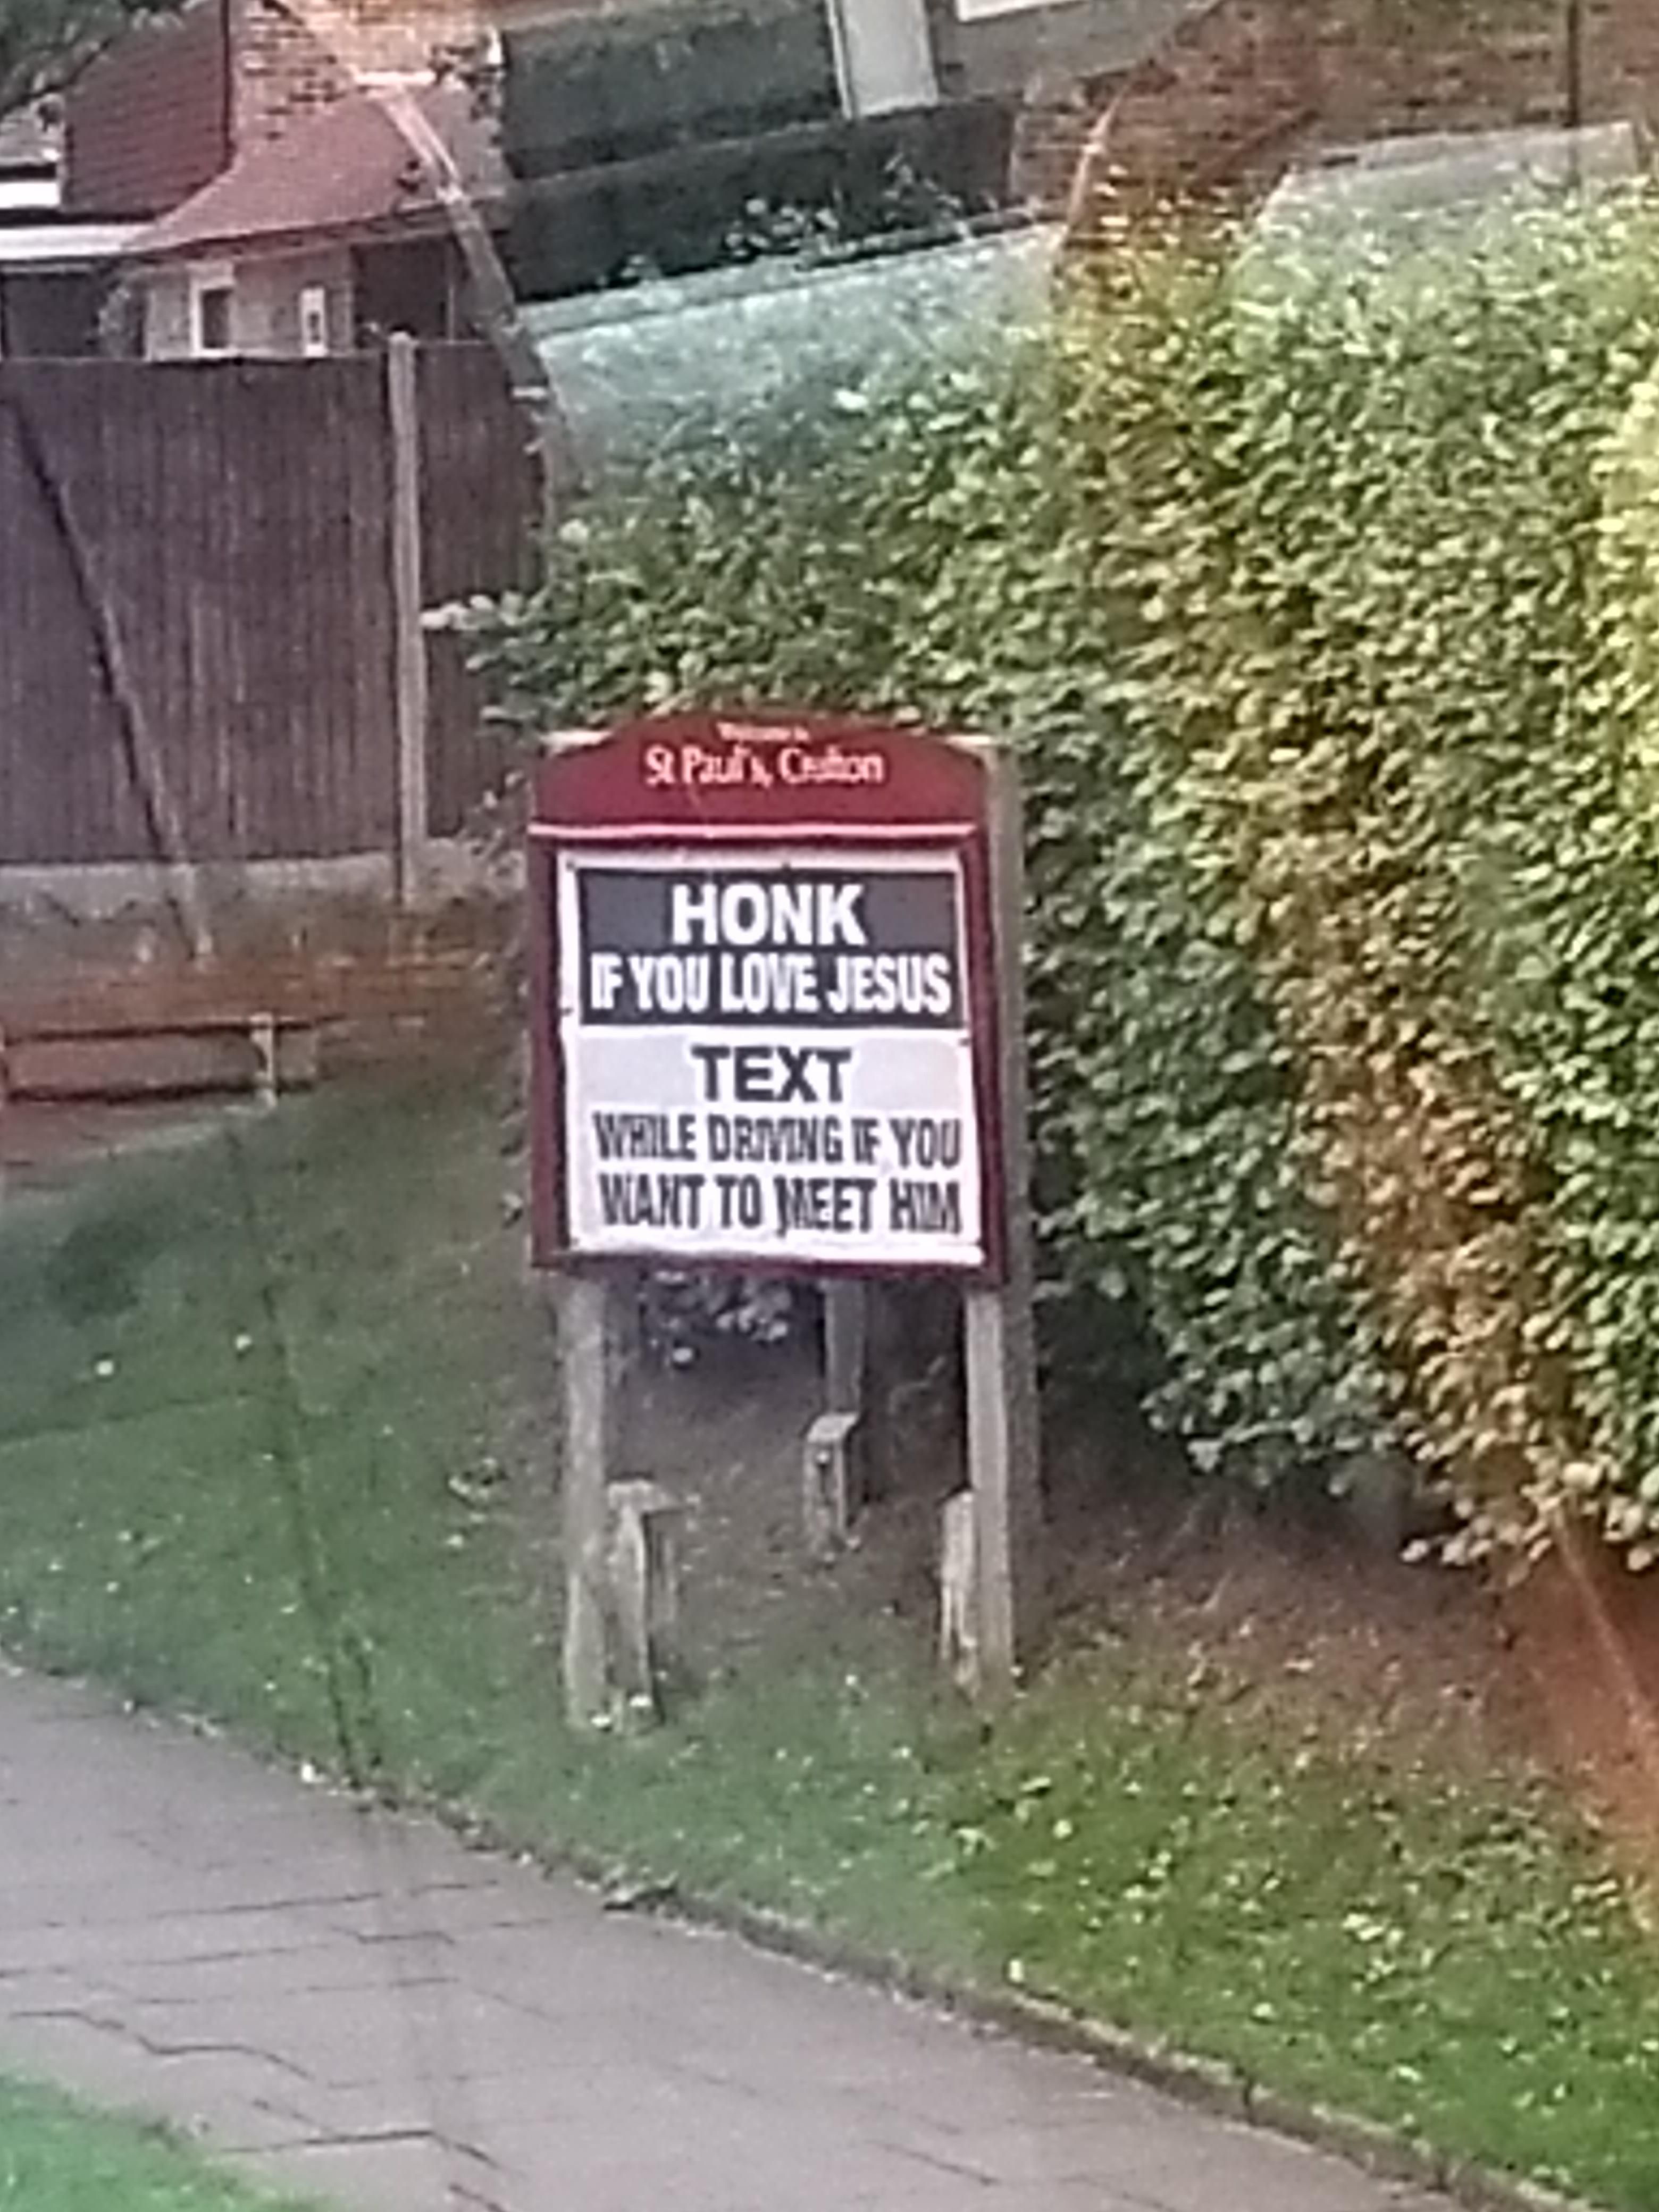 Saw this outside a church on my way home